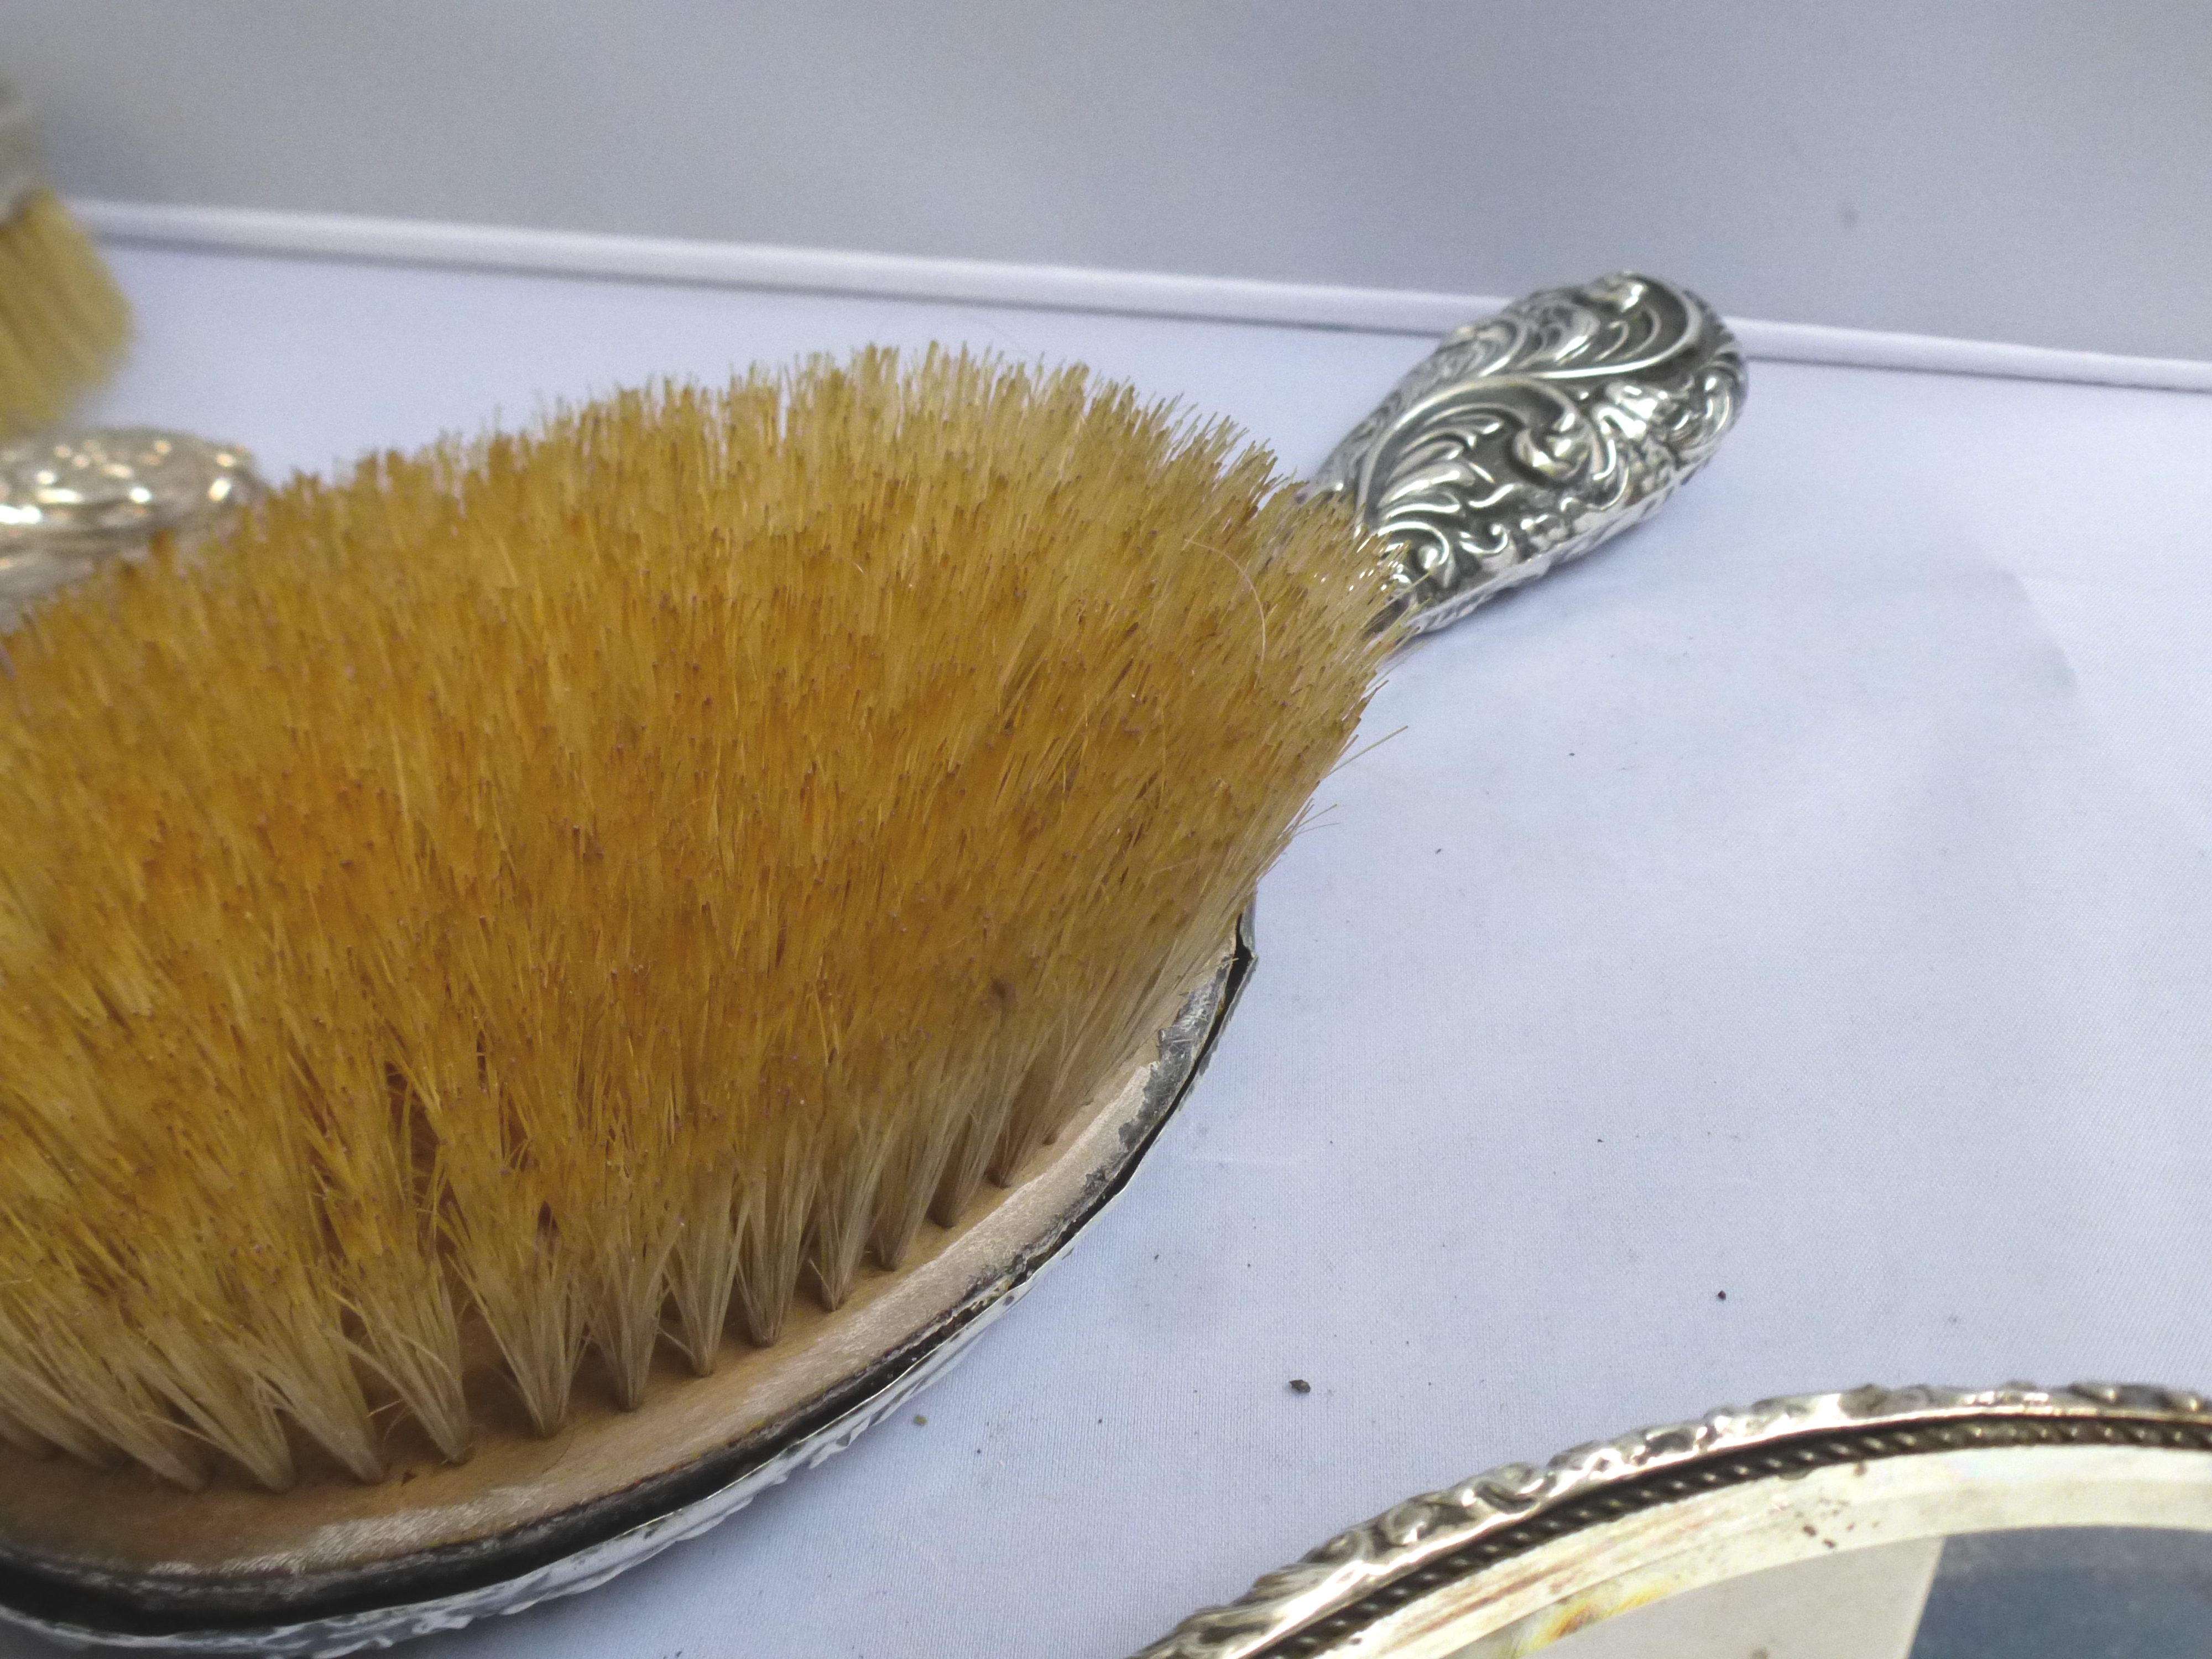 4 SILVER BACK BRUSHES AND A SILVER MIRROR - Image 11 of 14